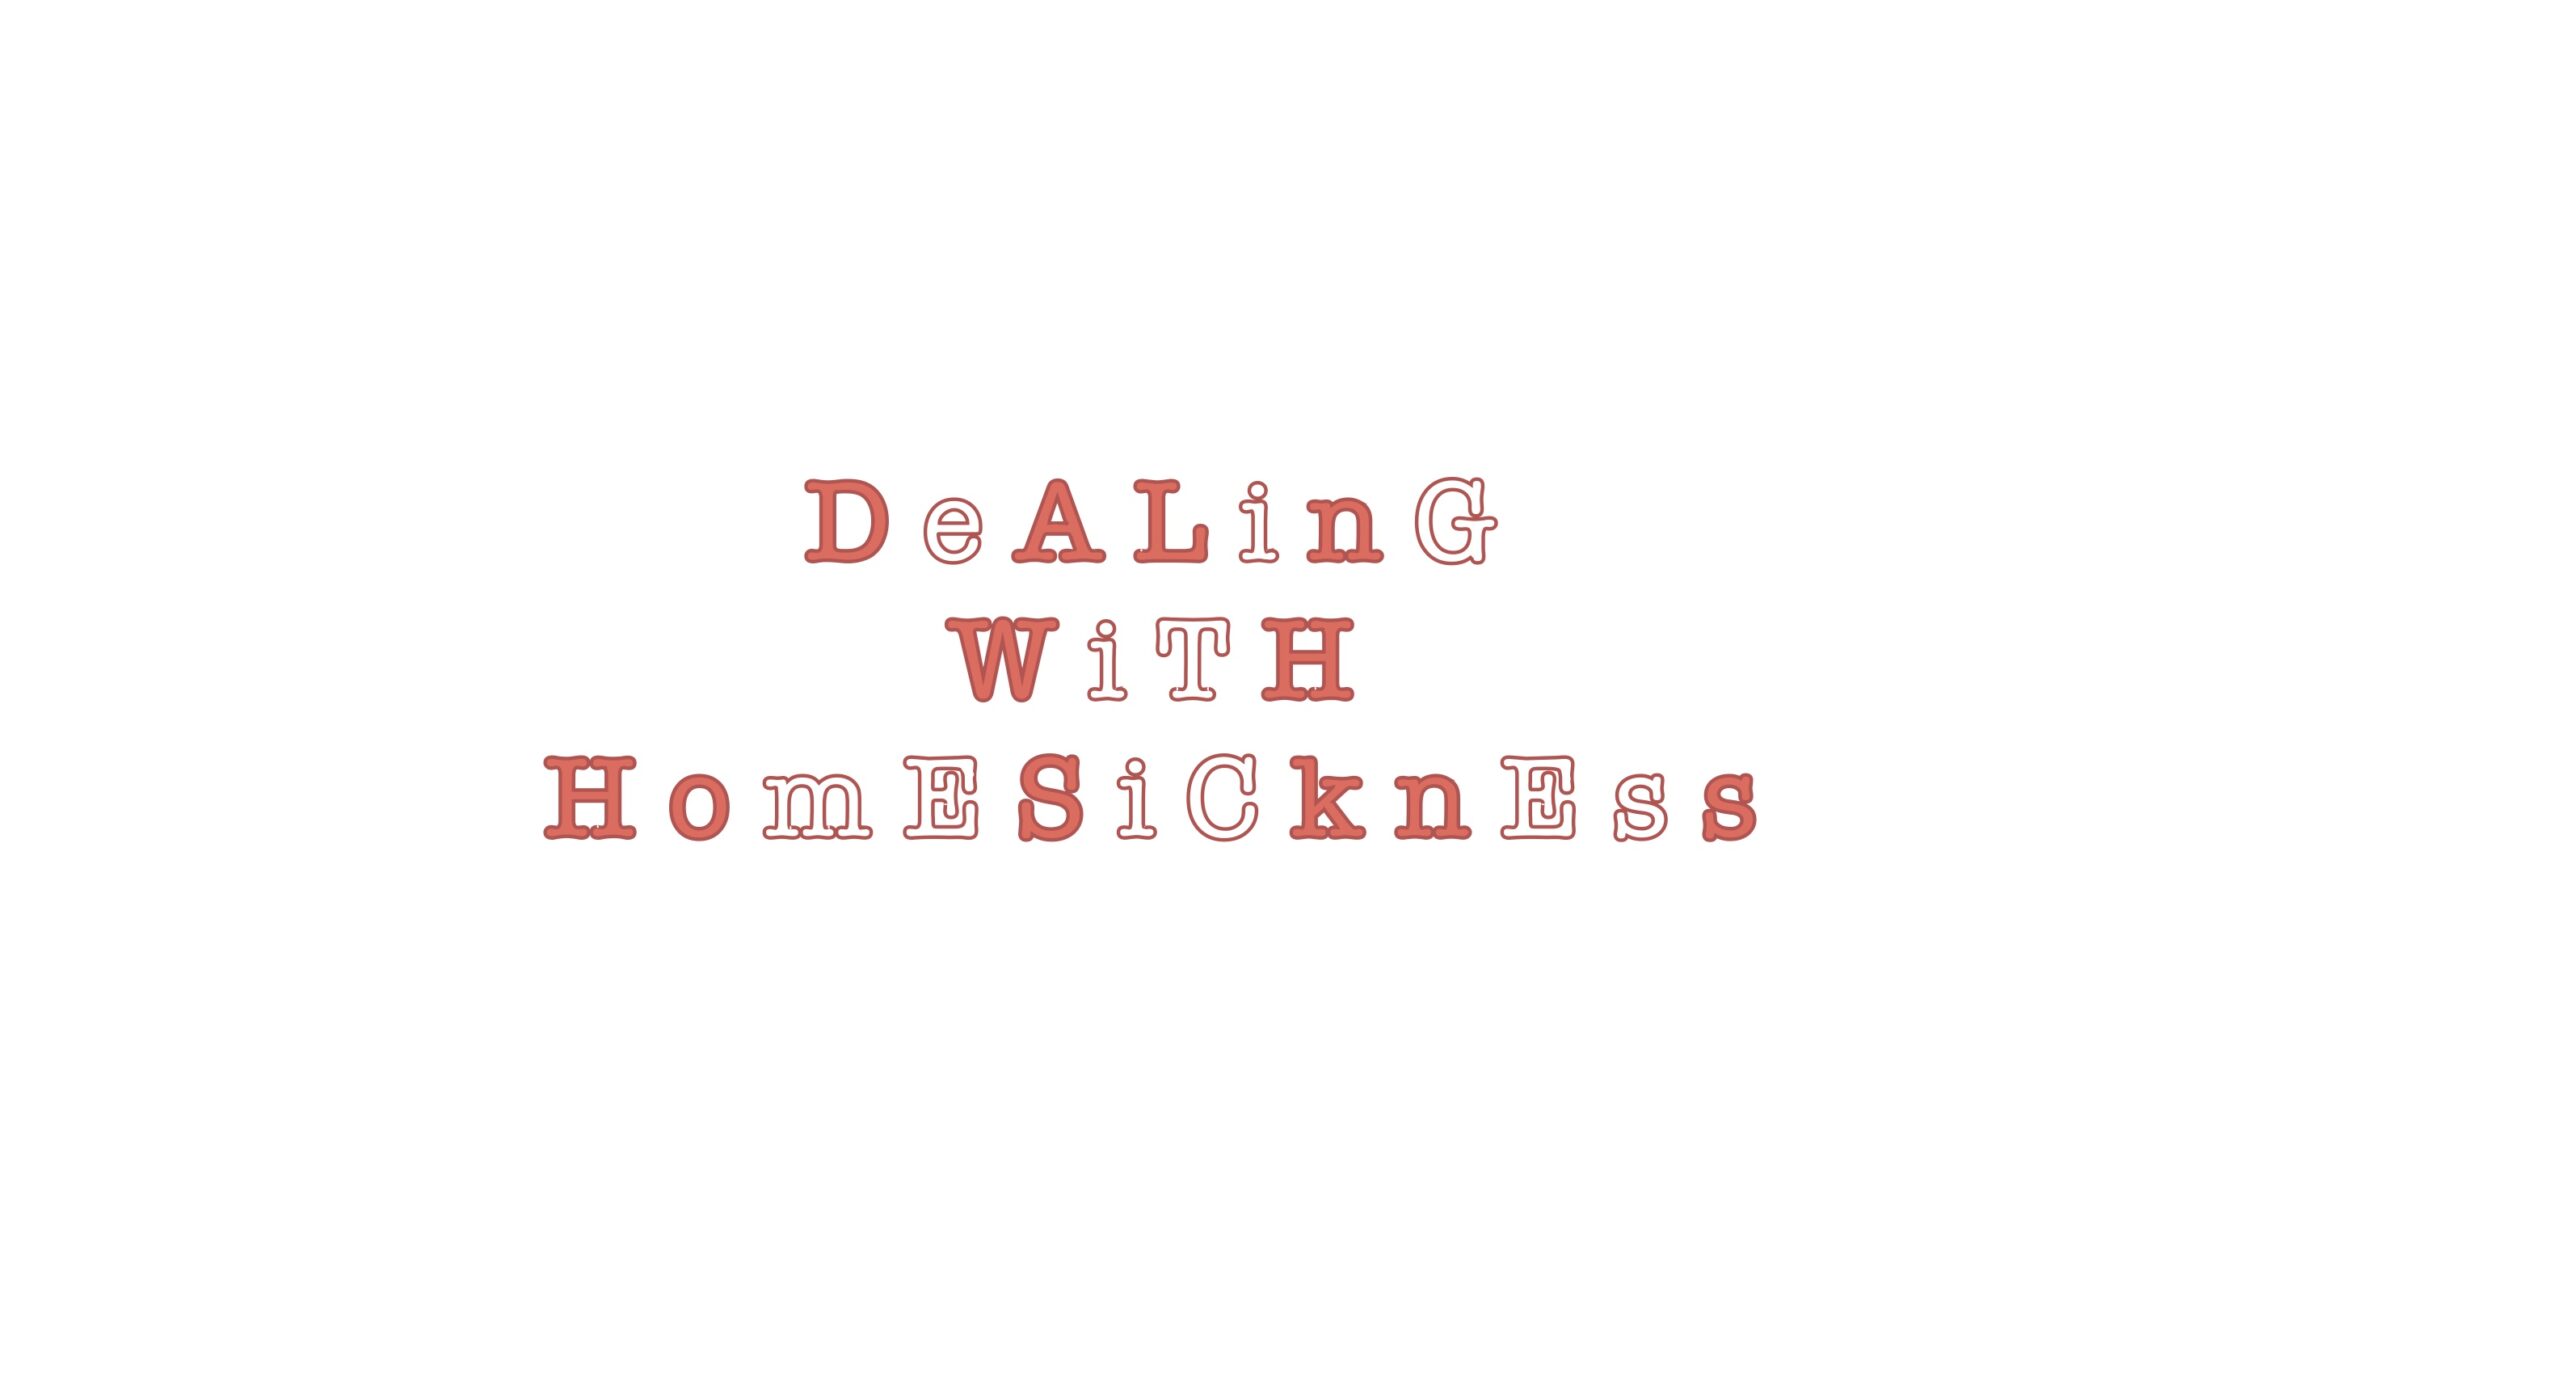 plain image with the words: "dealing with homesickness."